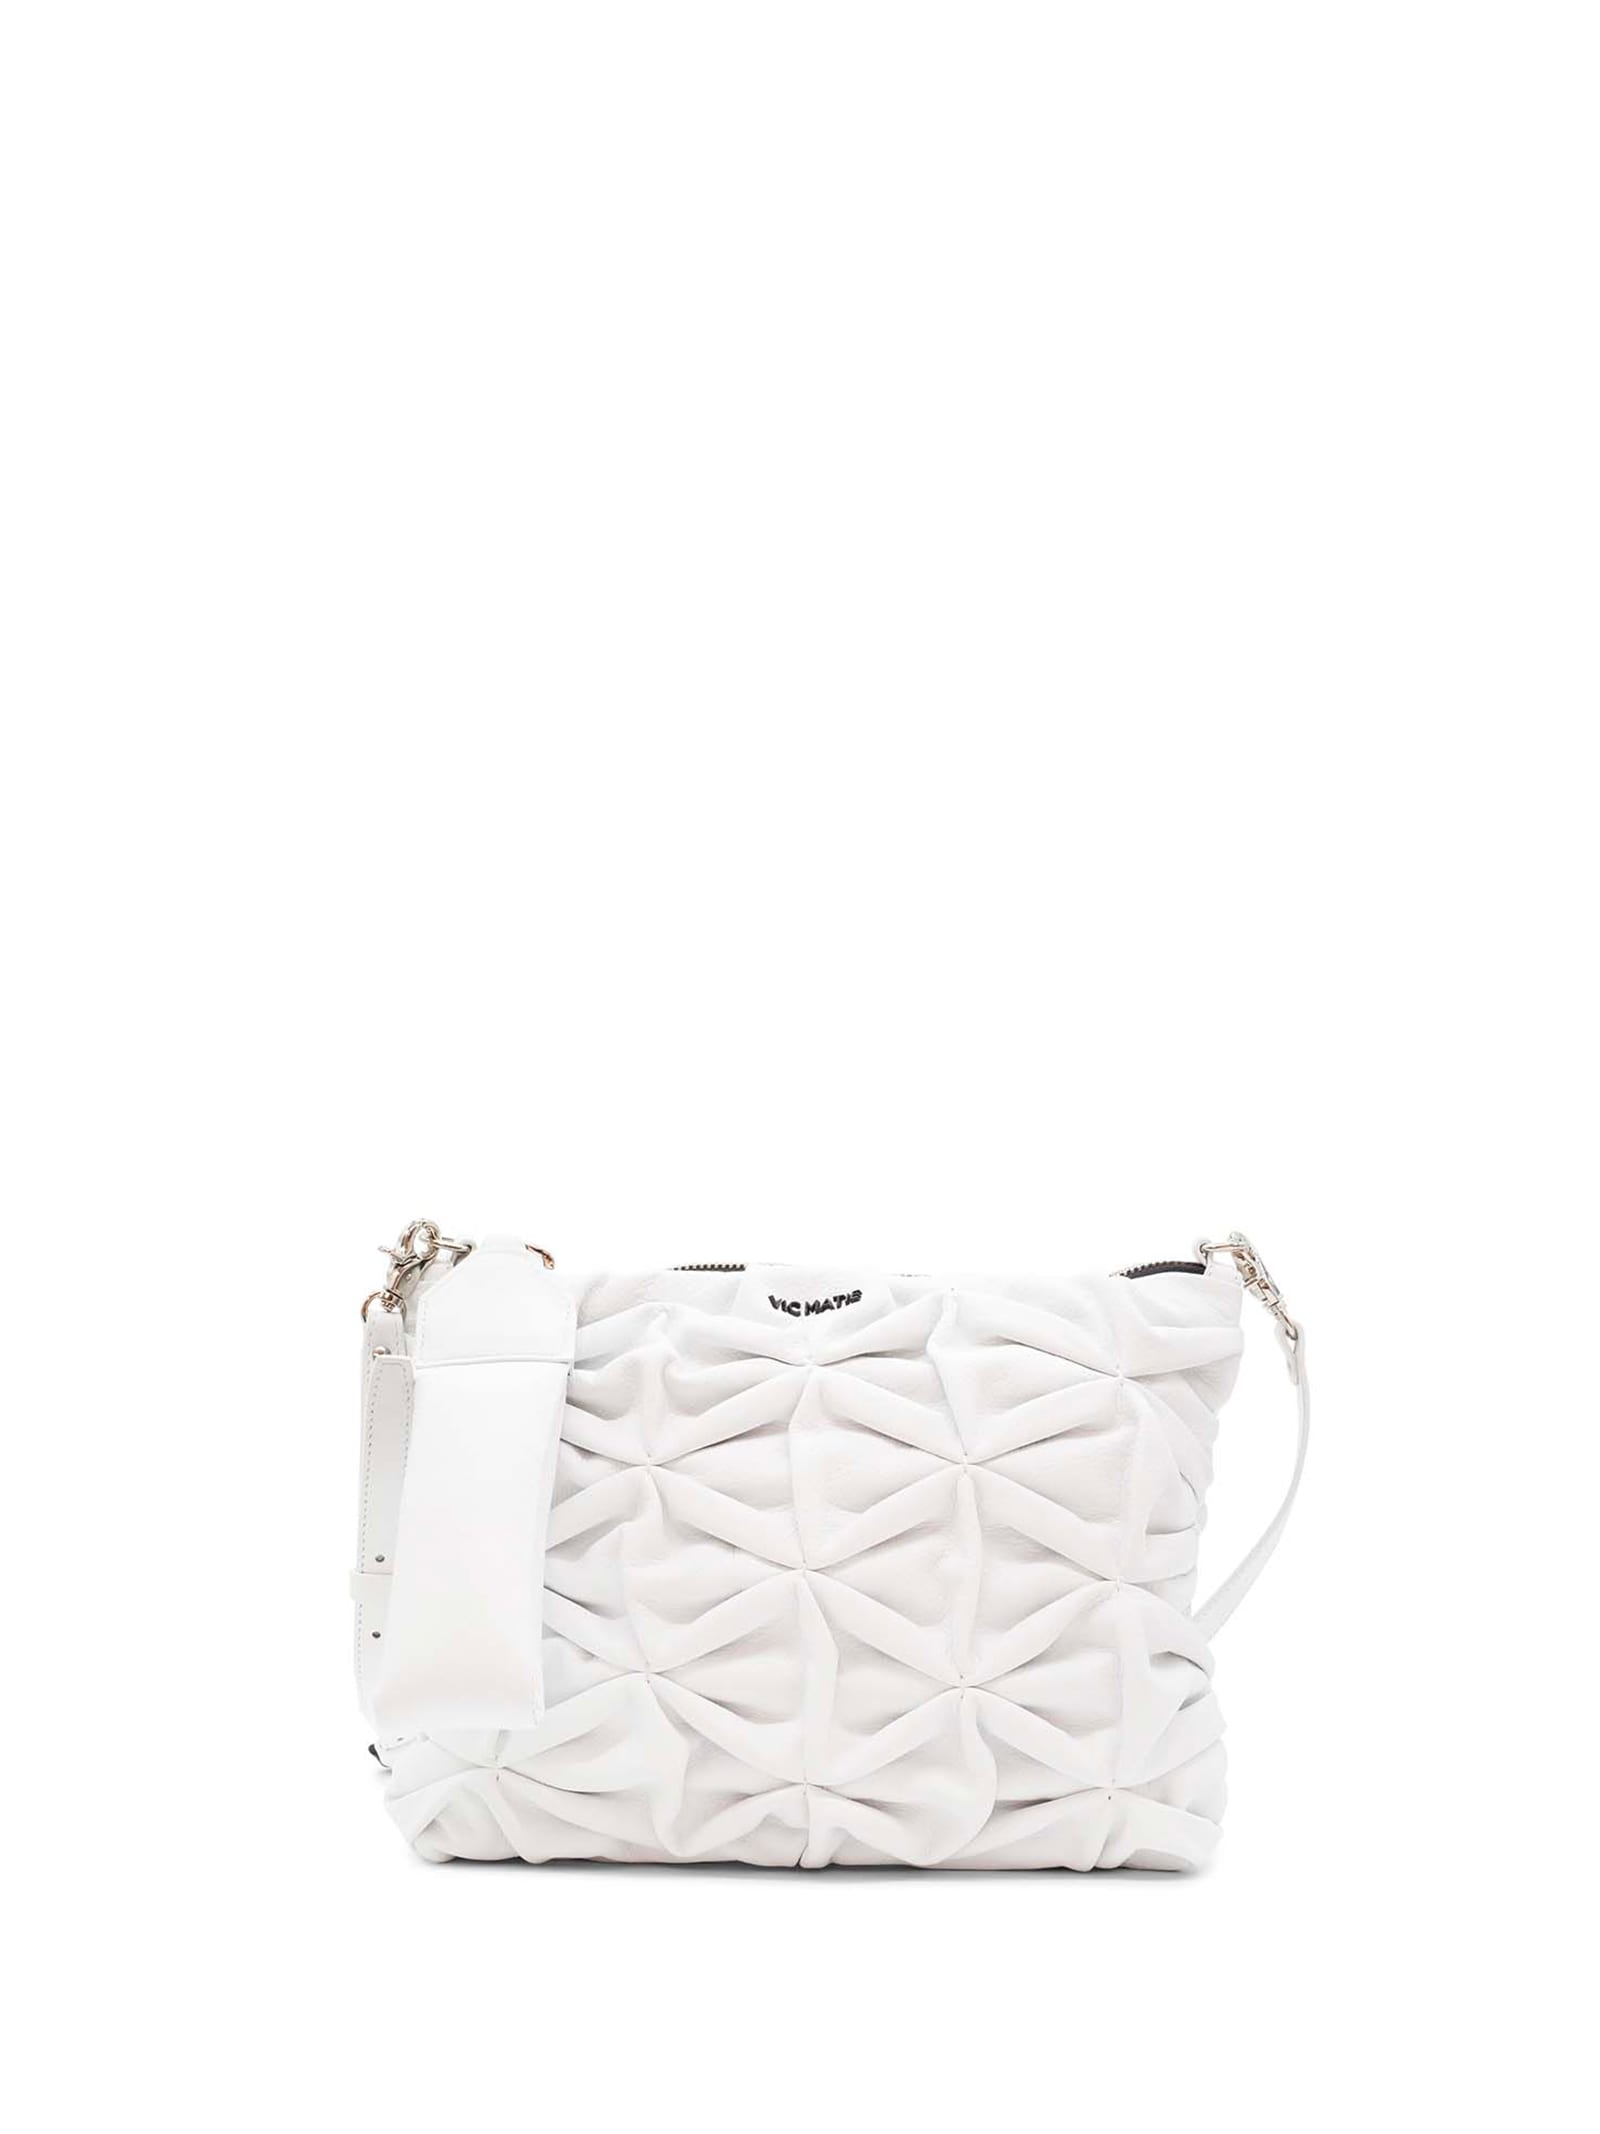 Vic Matie White Leather Bag With Shoulder Strap